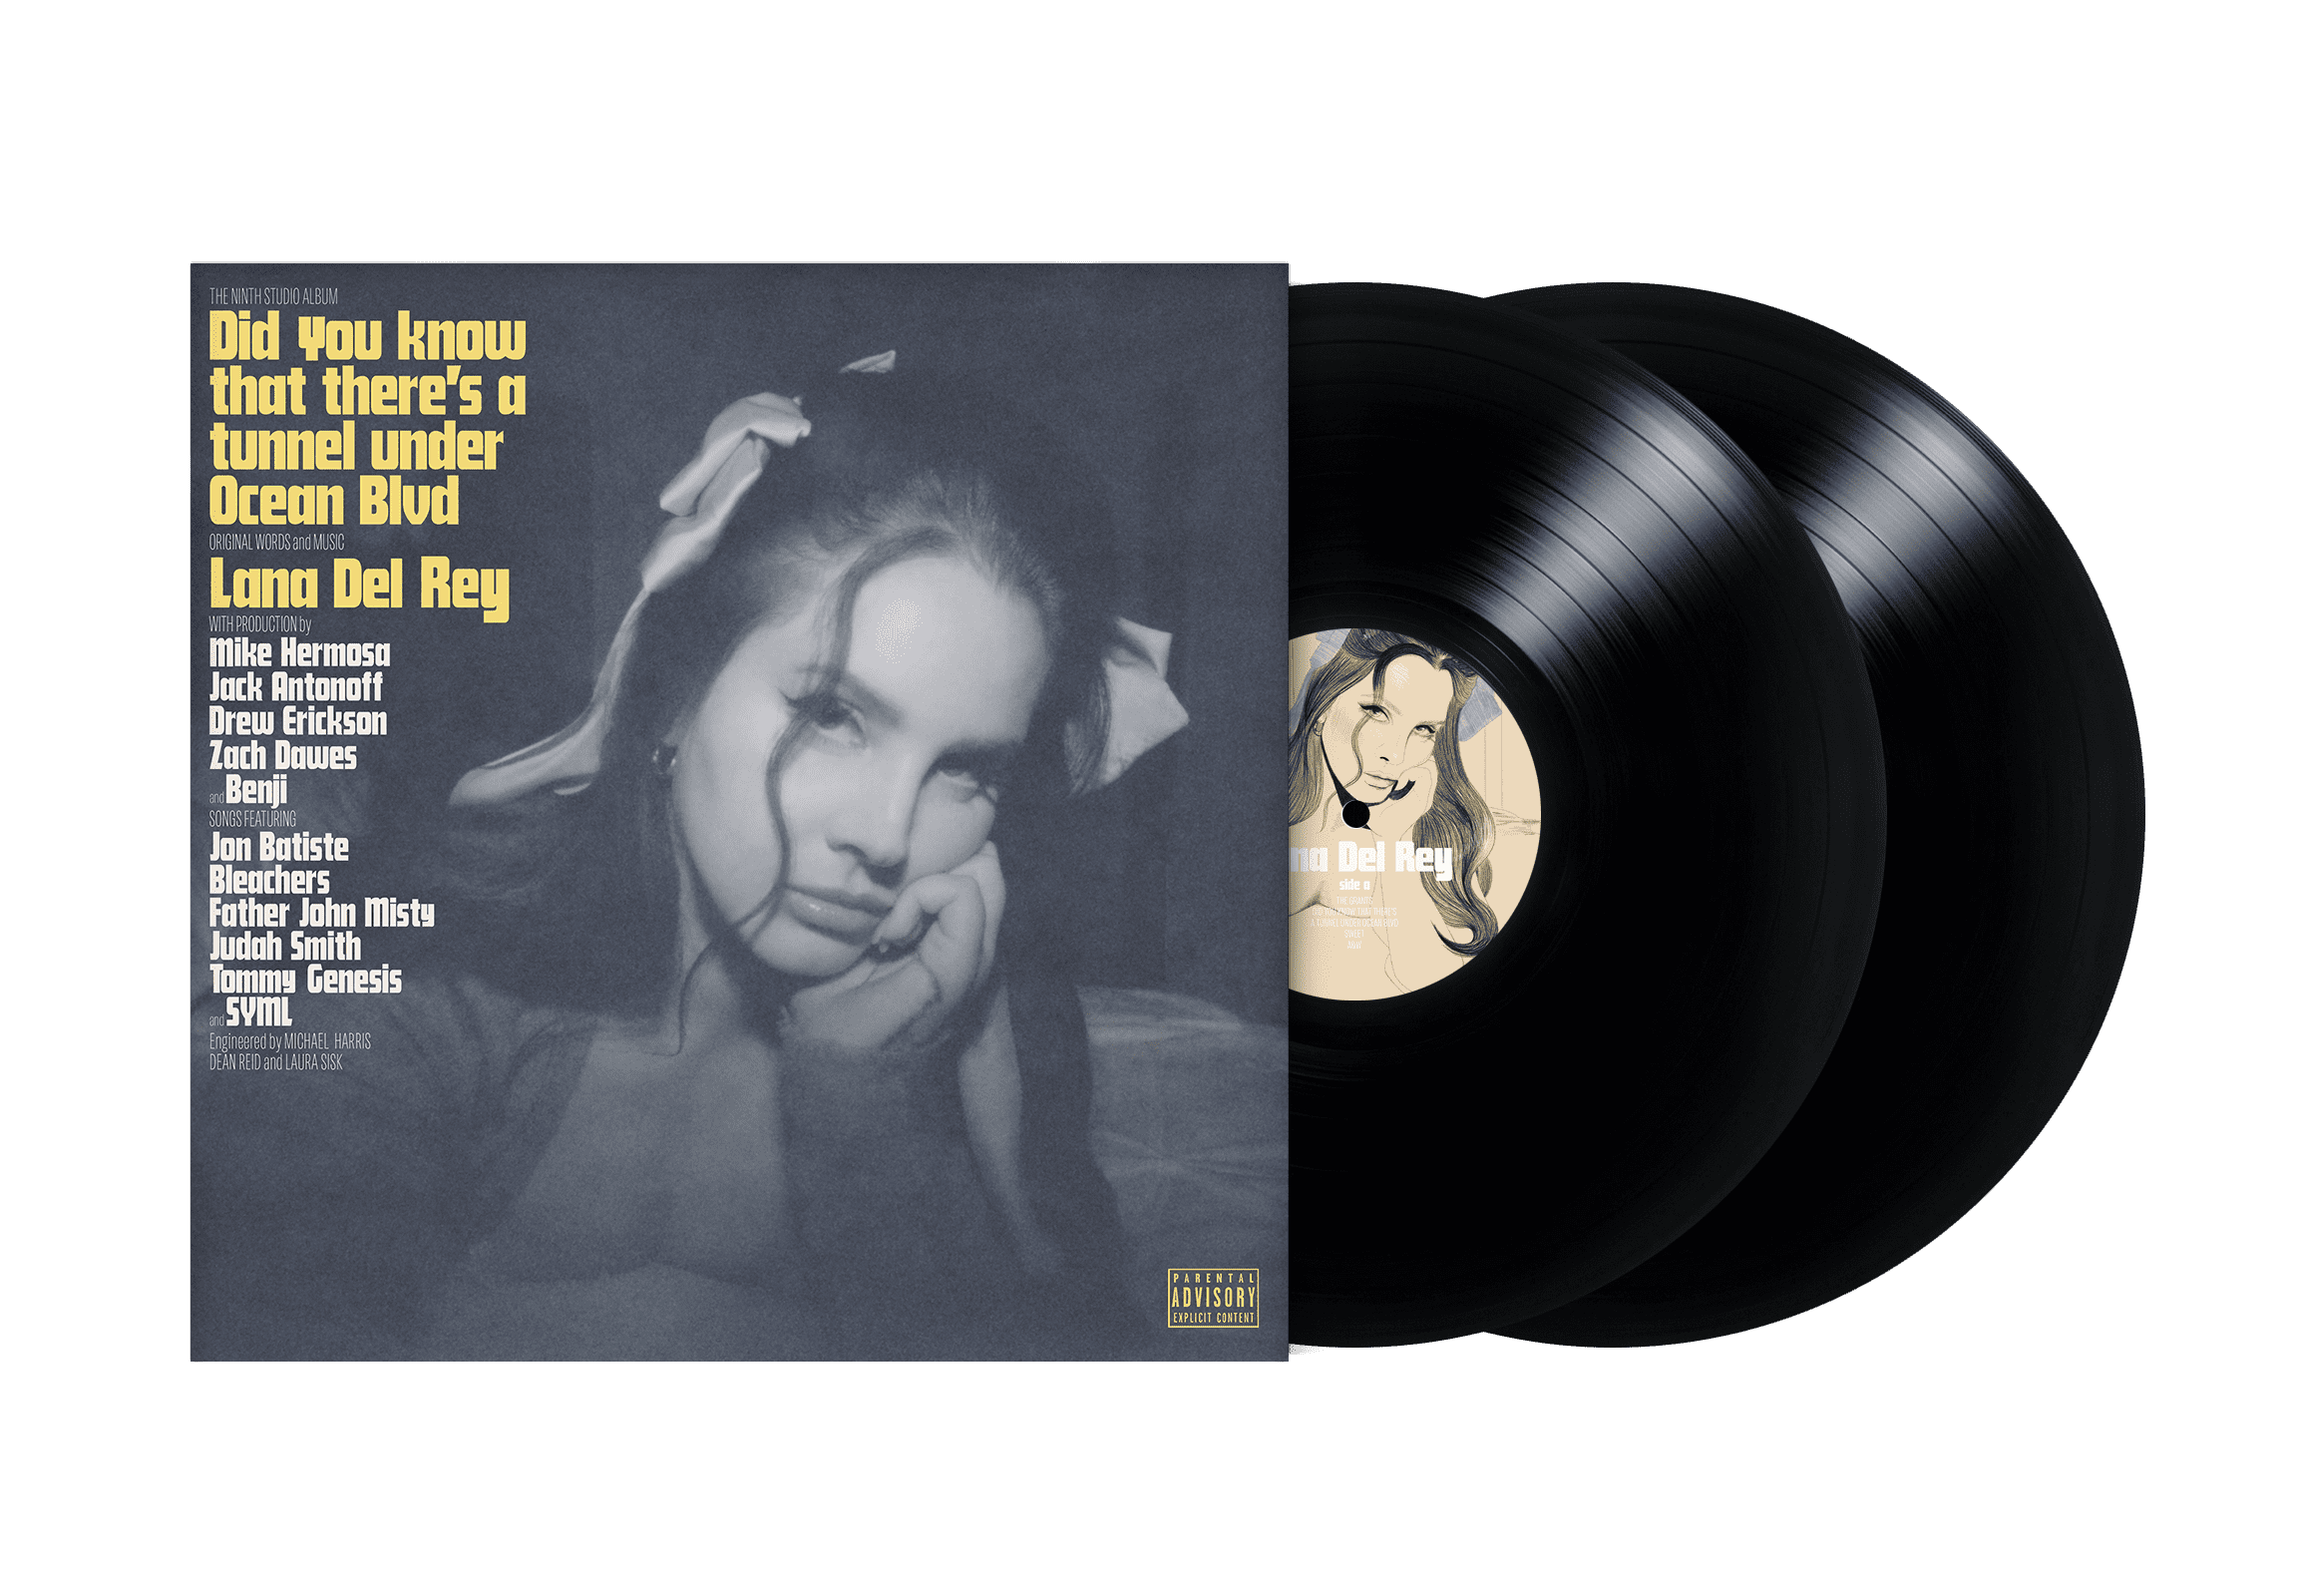 Lana Del Rey - Did You Know That There's A Tunnel Under Ocean Blvd - - - Vinyl LP (Interscope Records) - Walmart.com